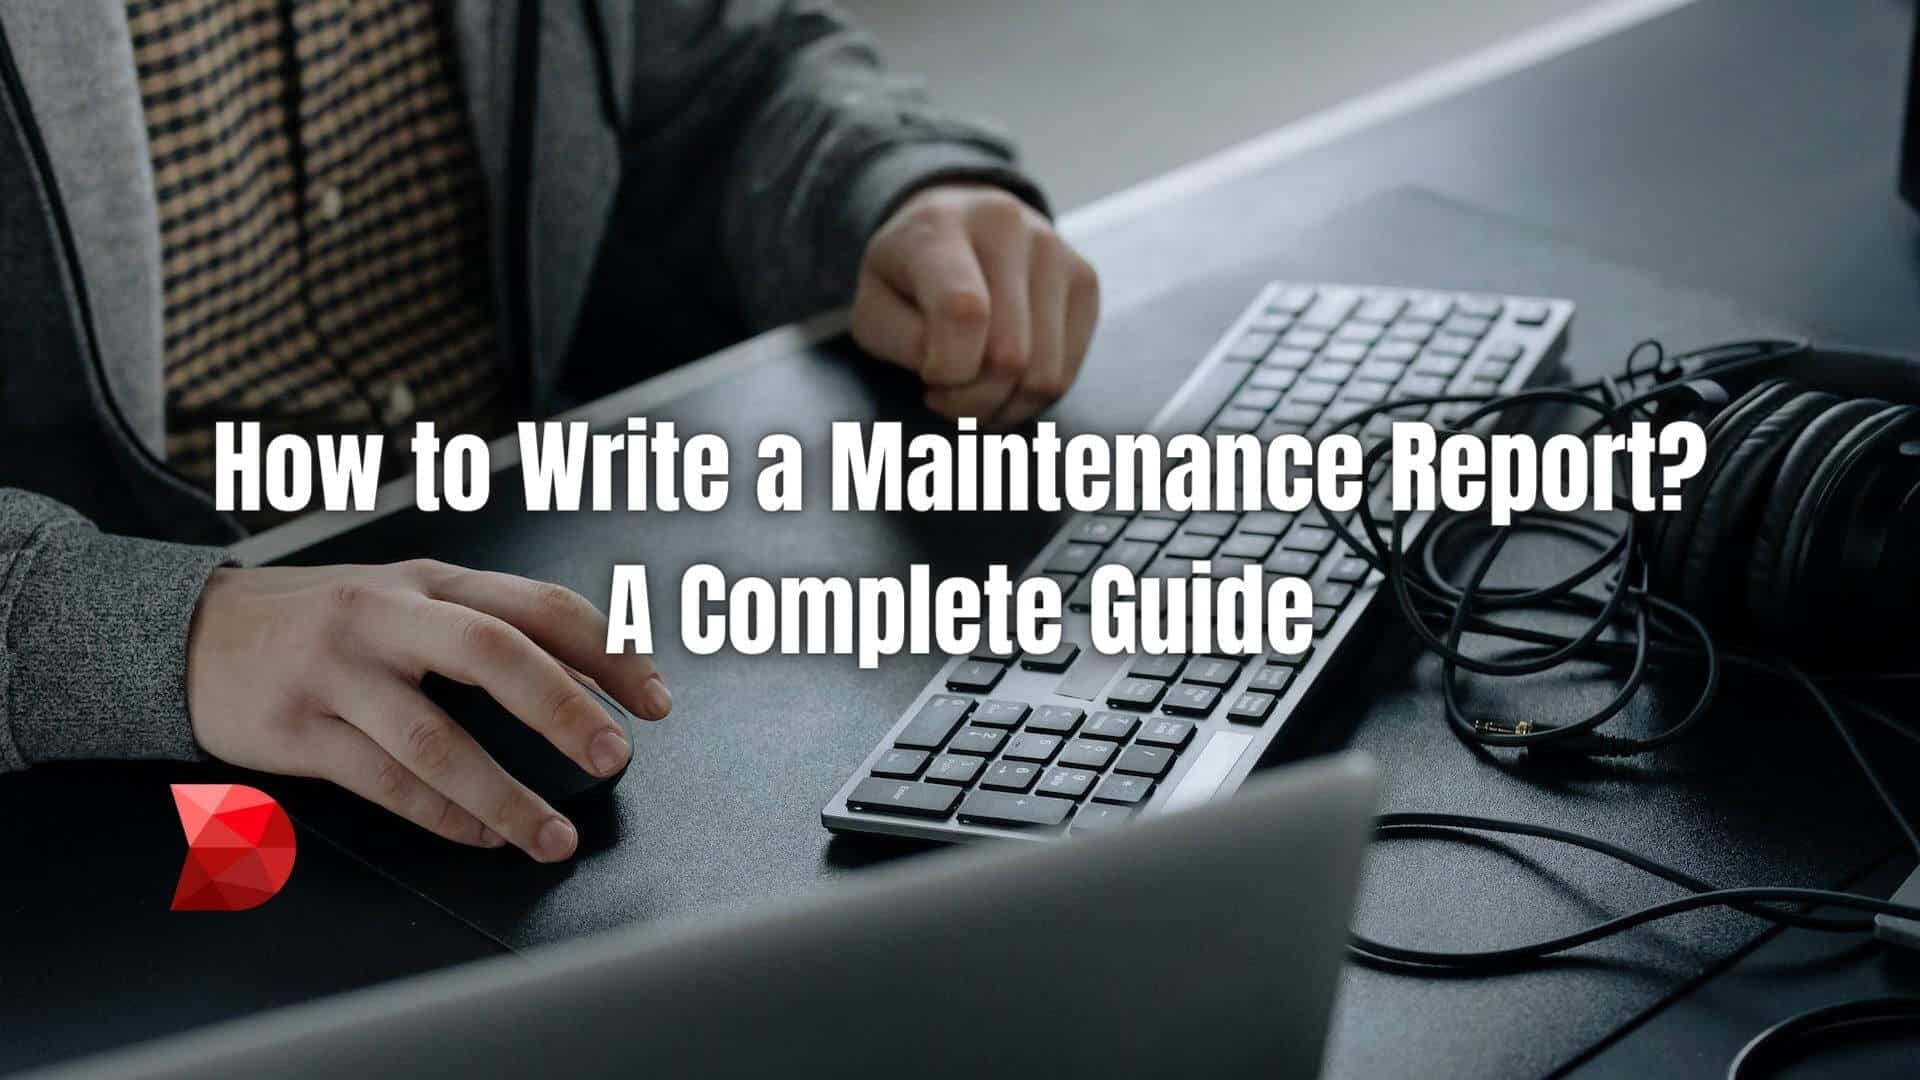 This comprehensive guide will take you through everything you need to know about writing a maintenance report. Read here to learn more!